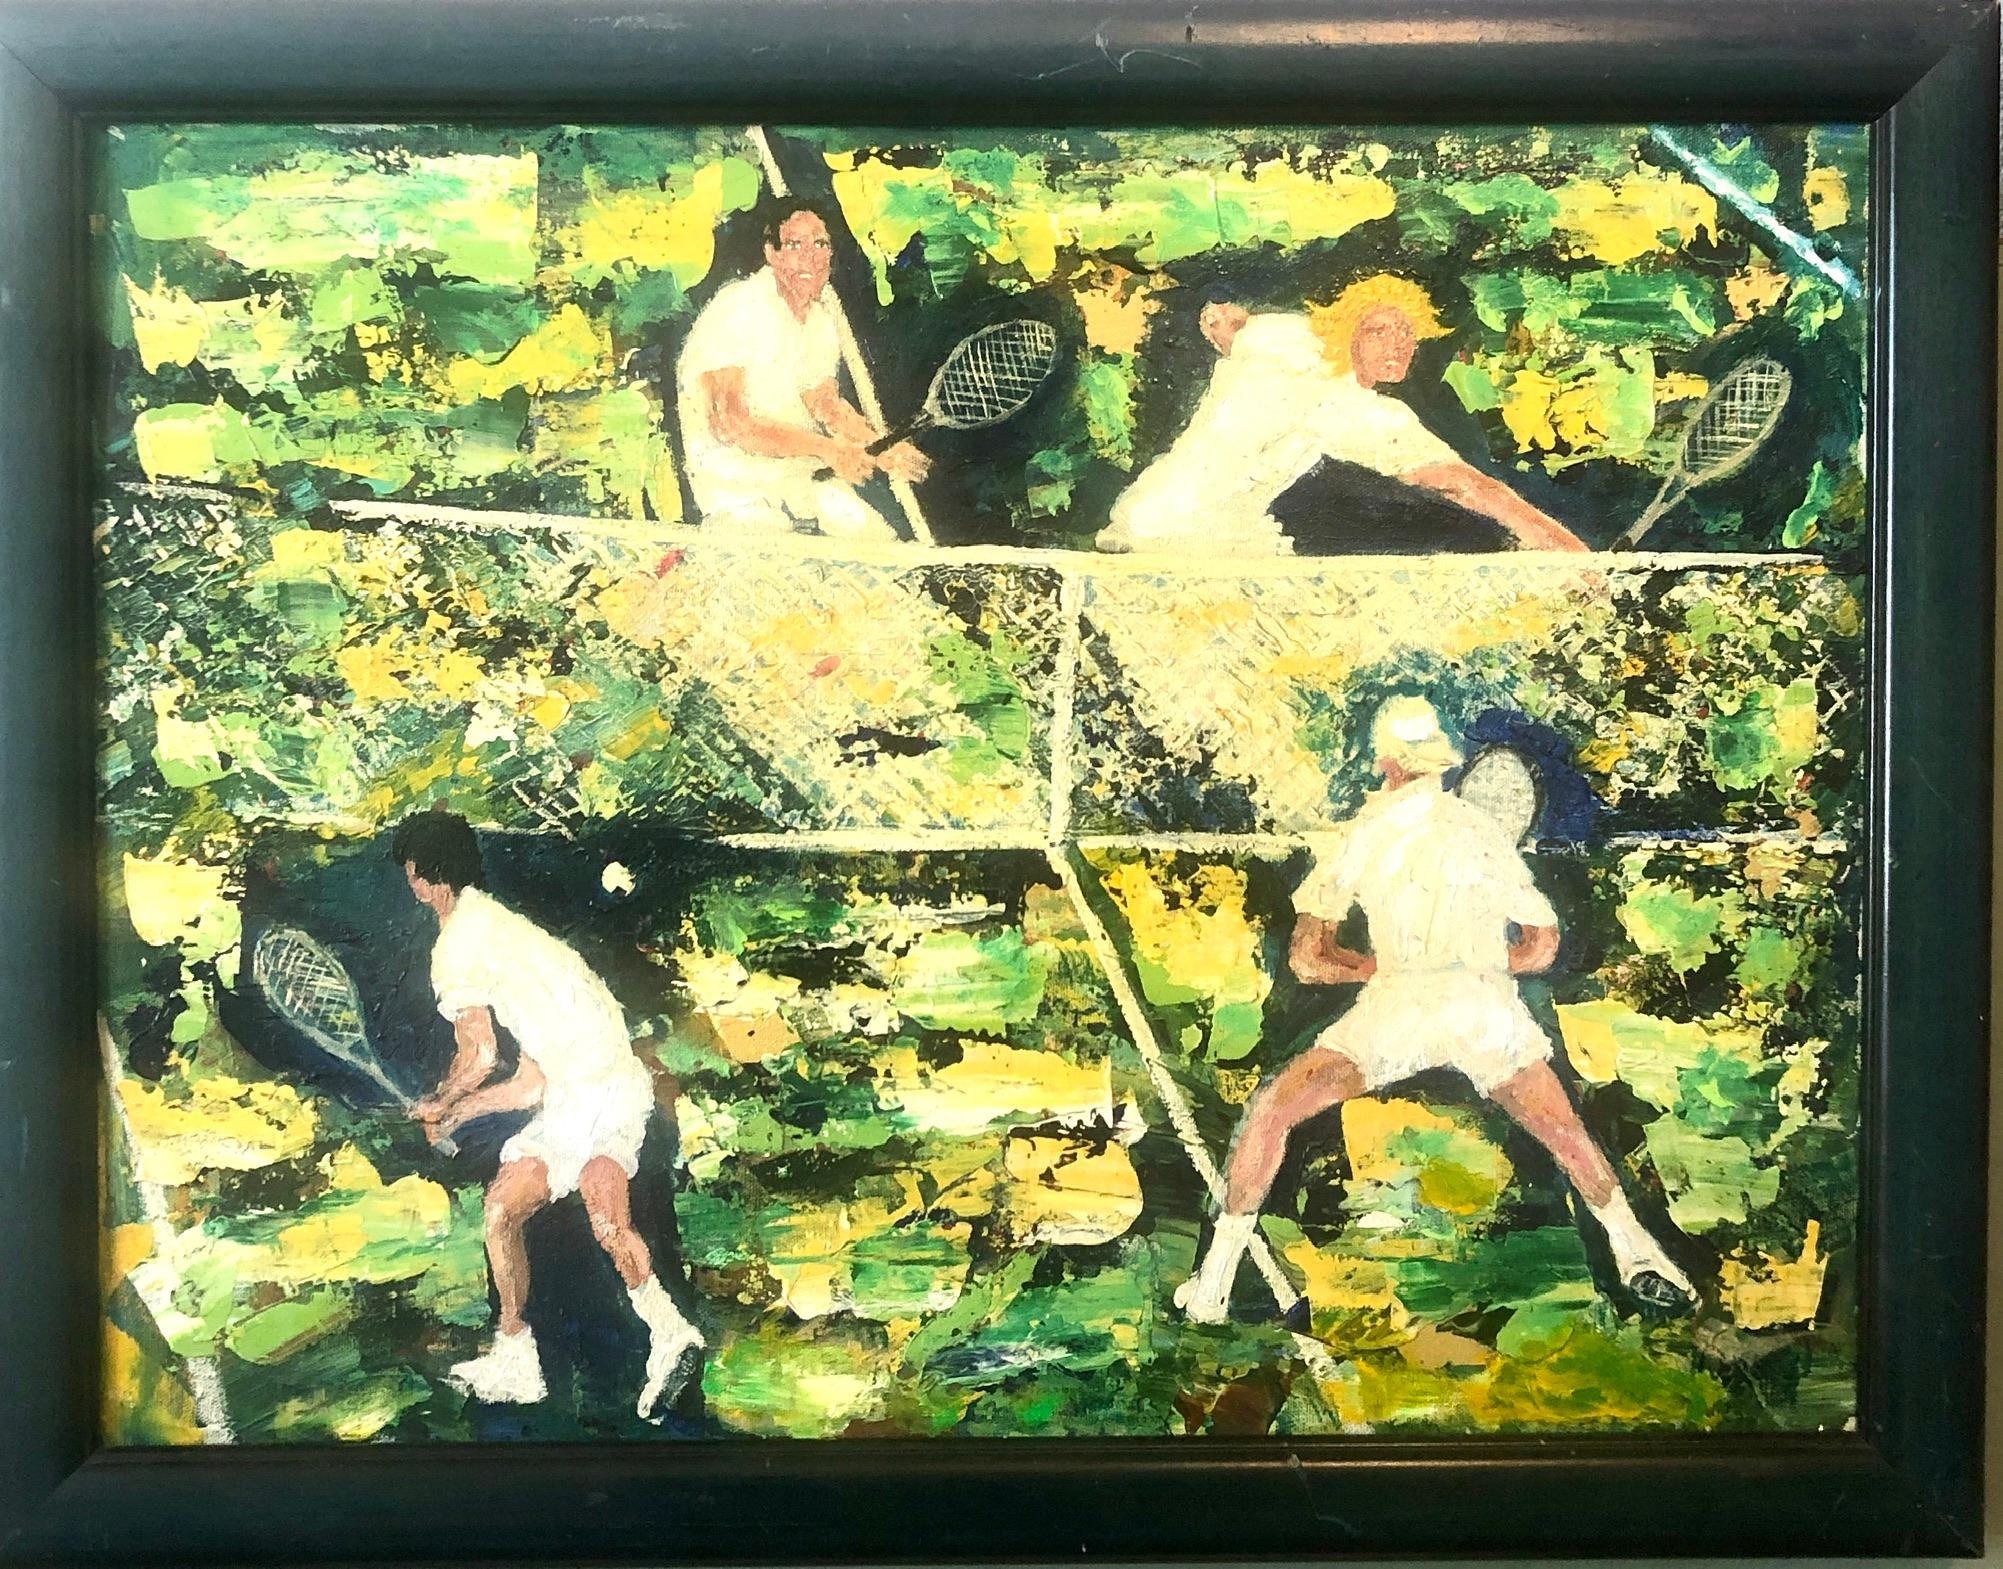 Paolo Corvino Figurative Painting - 1960's Oil Painting Tennis Match Sports Scene After Leroy Neiman Sporting Art